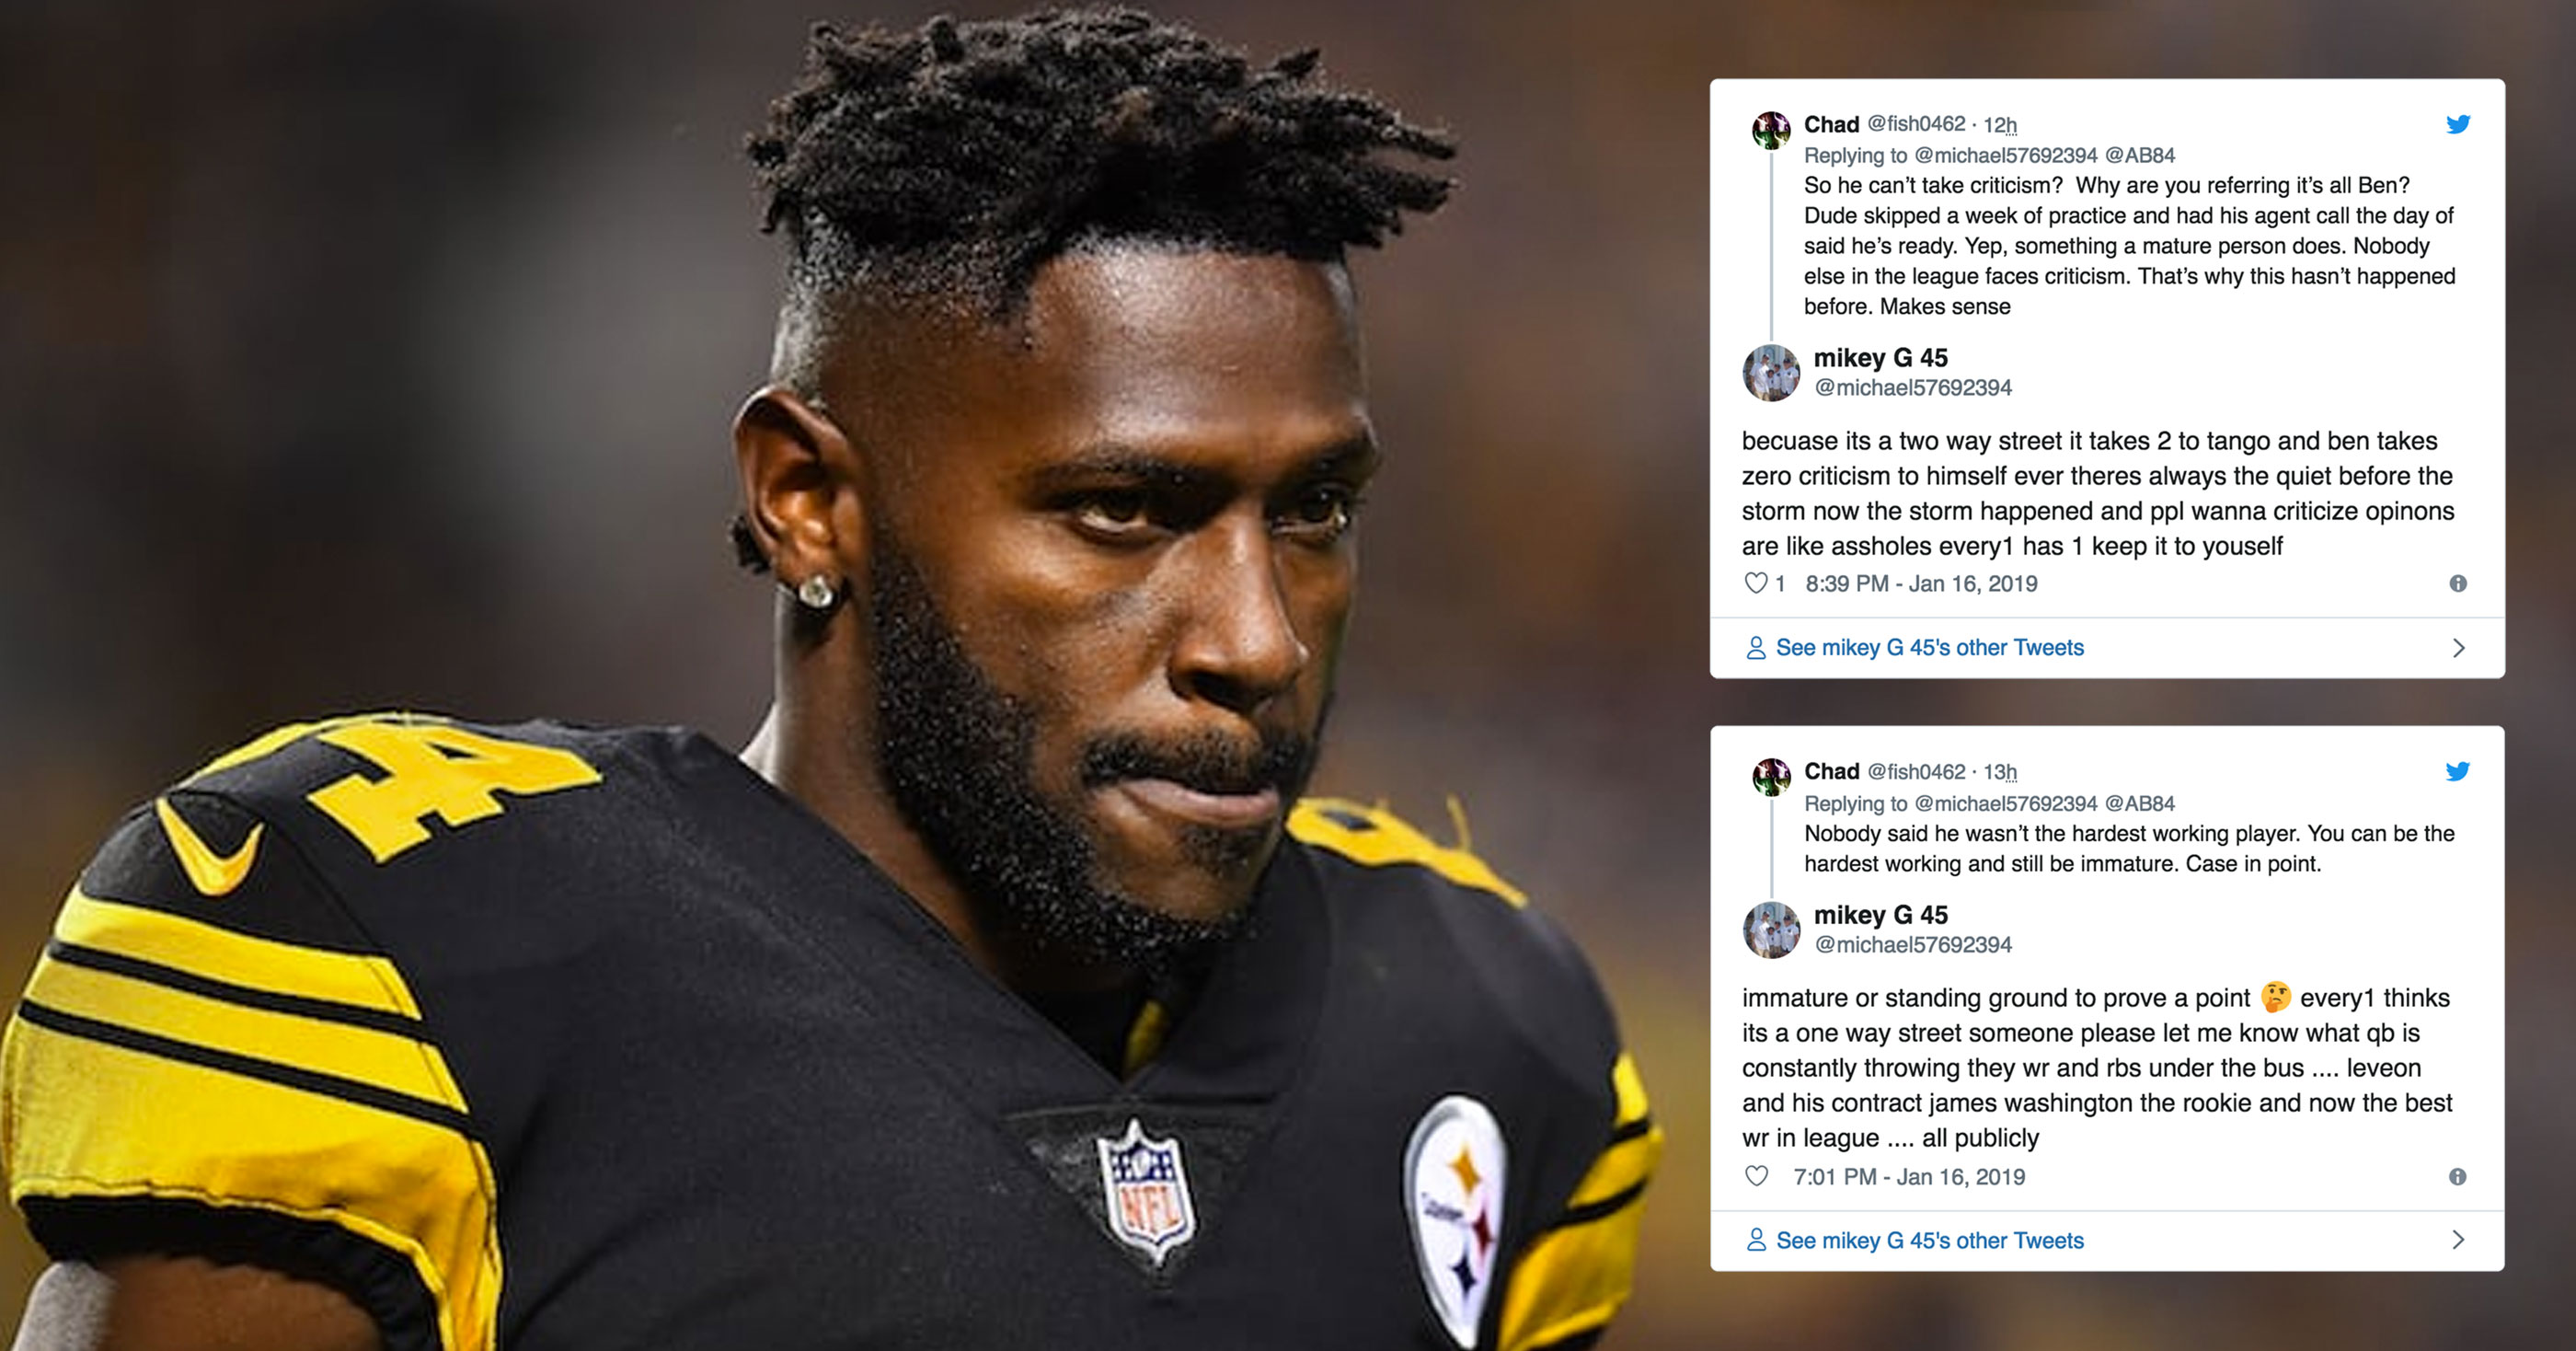 Fans Have Uncovered What Appears To Be Steelers WR Antonio Brown's Burner Account (PICS)